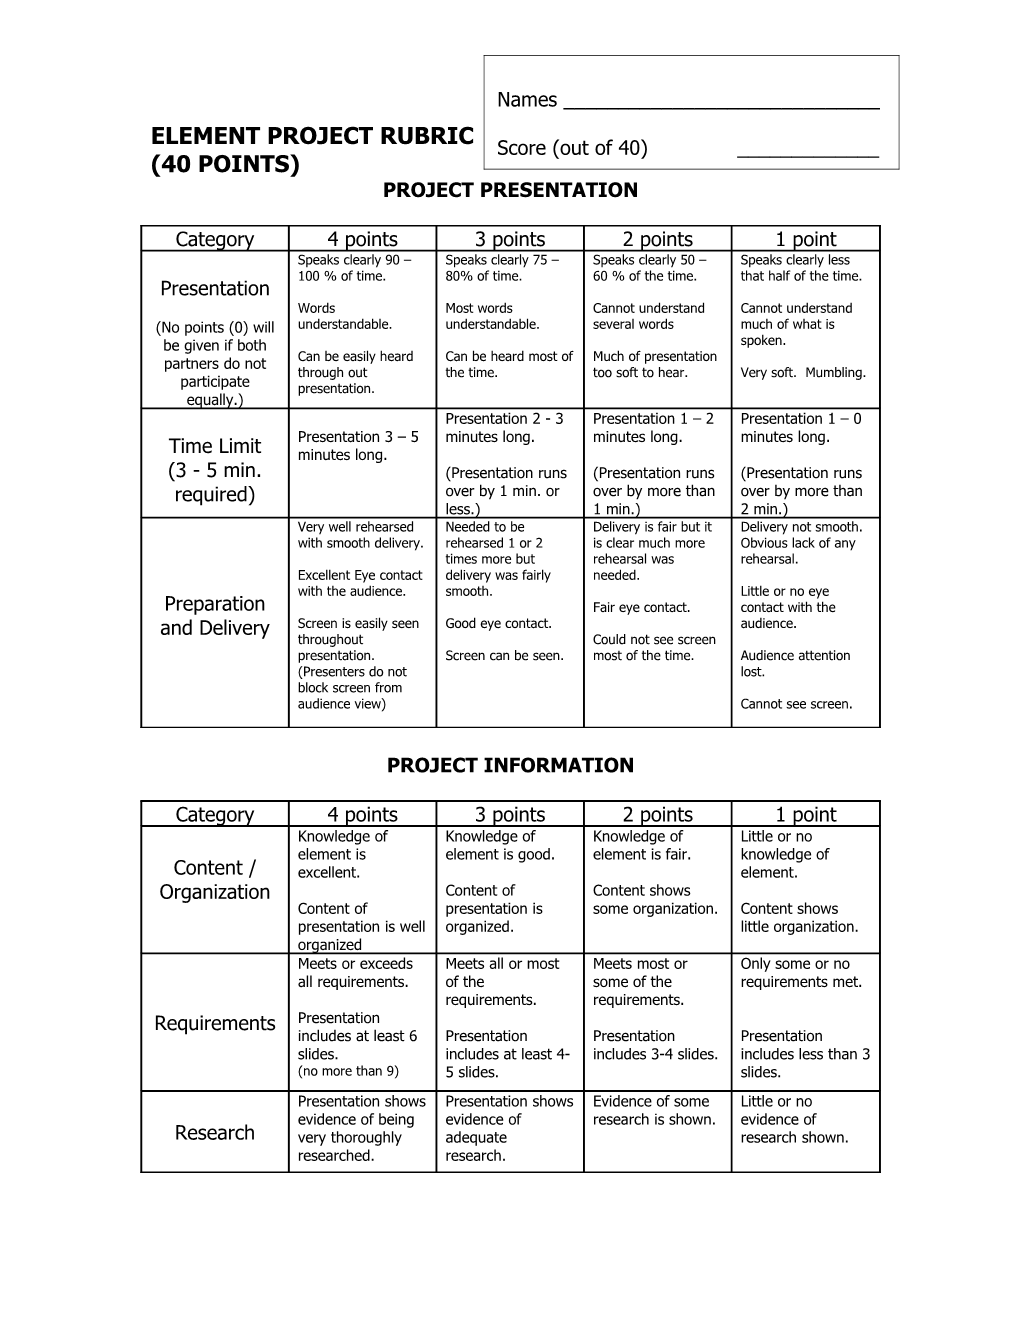 Element Project Rubric